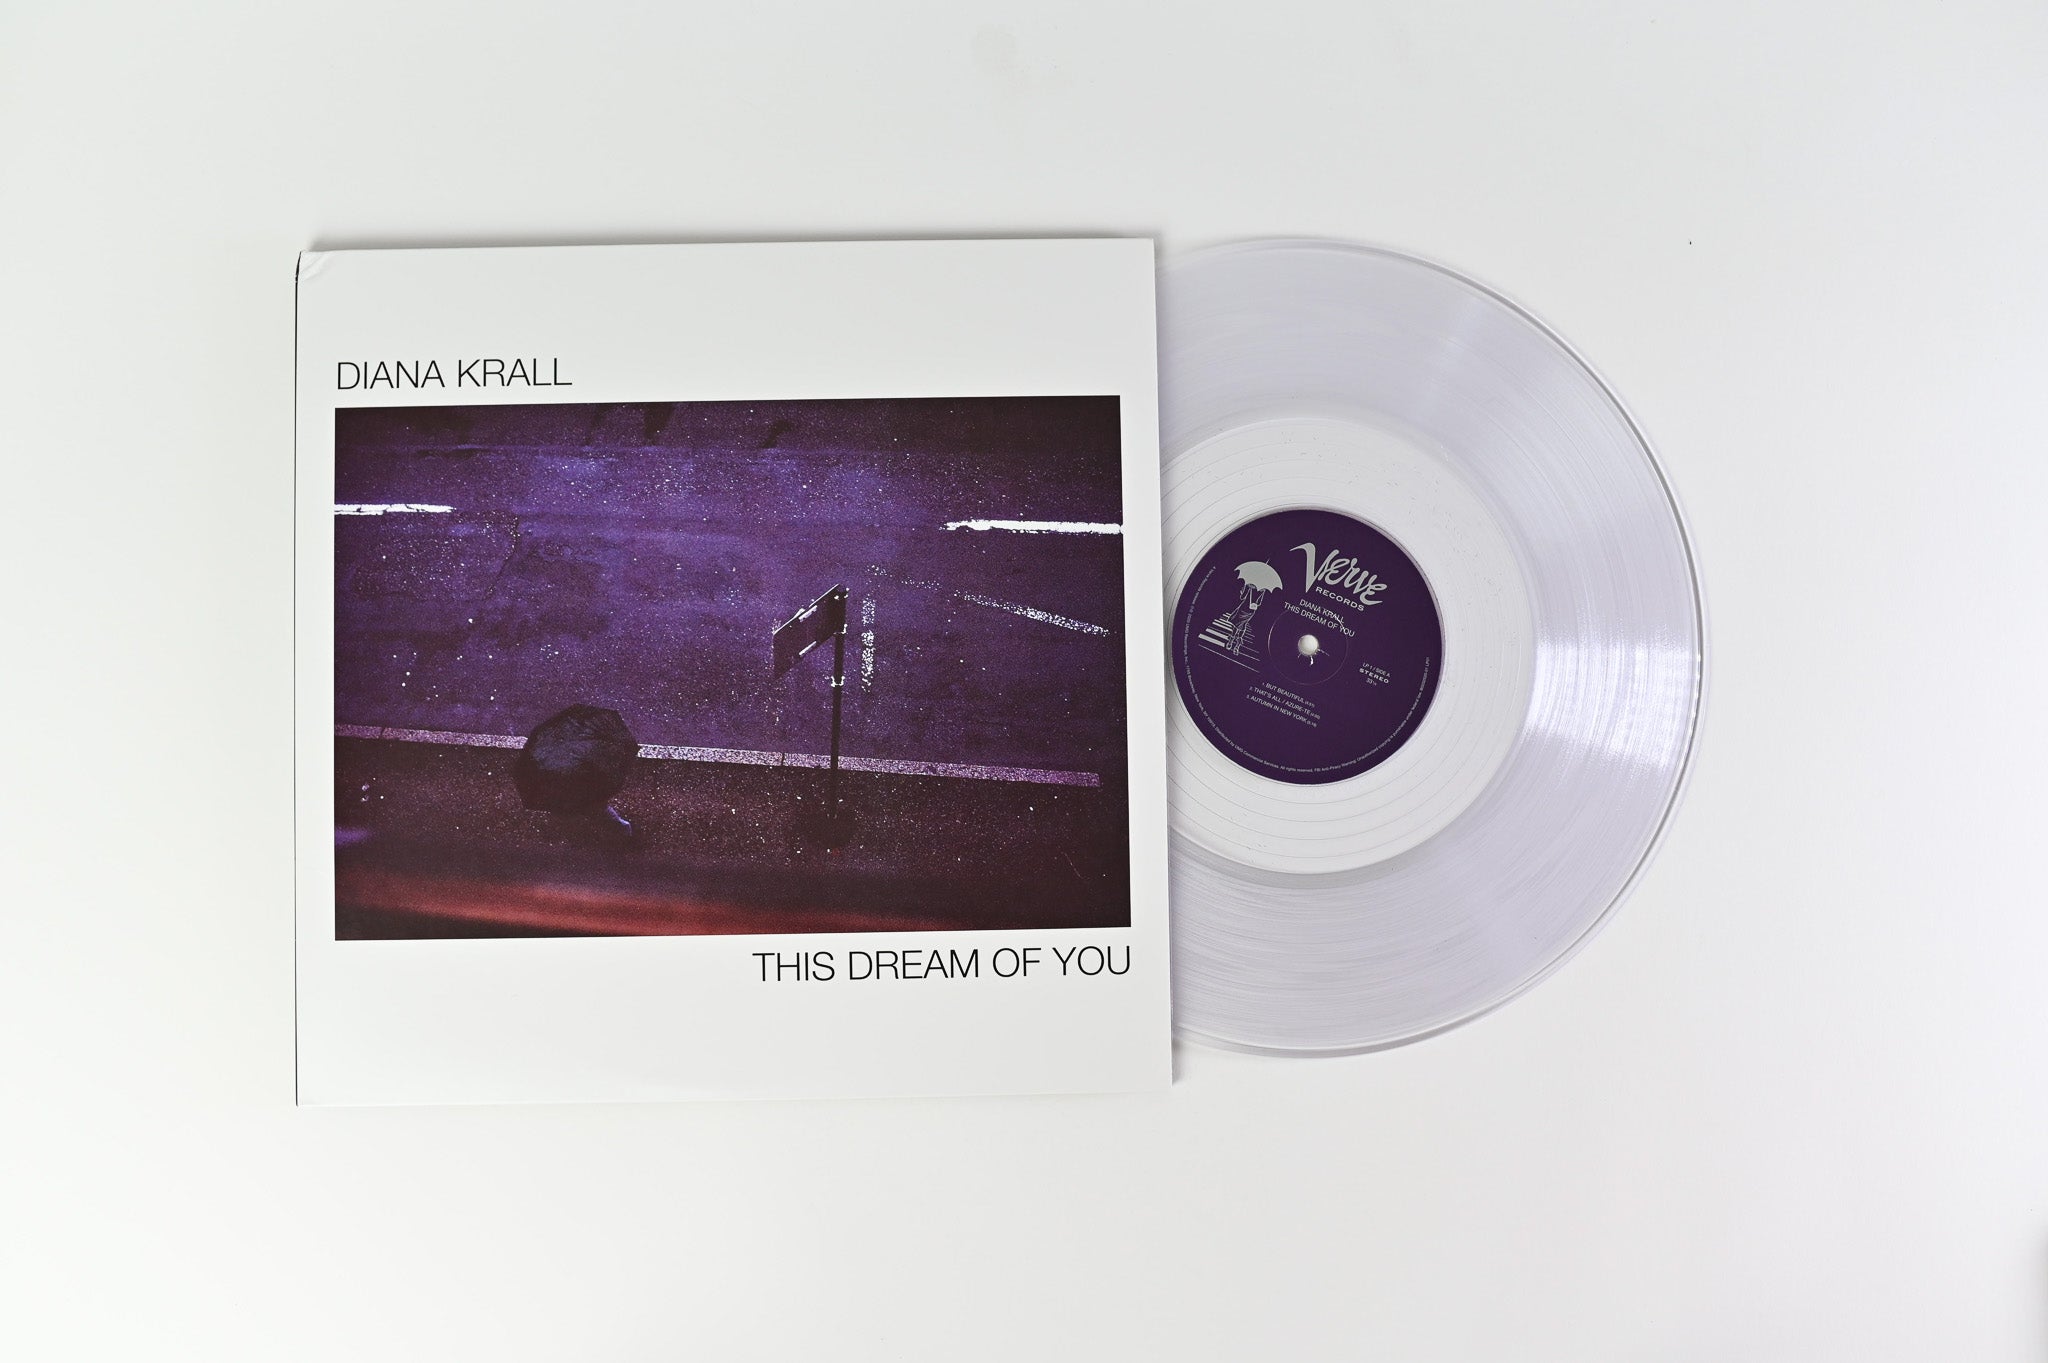 Diana Krall - This Dream Of You on Verve Ltd Clear Vinyl